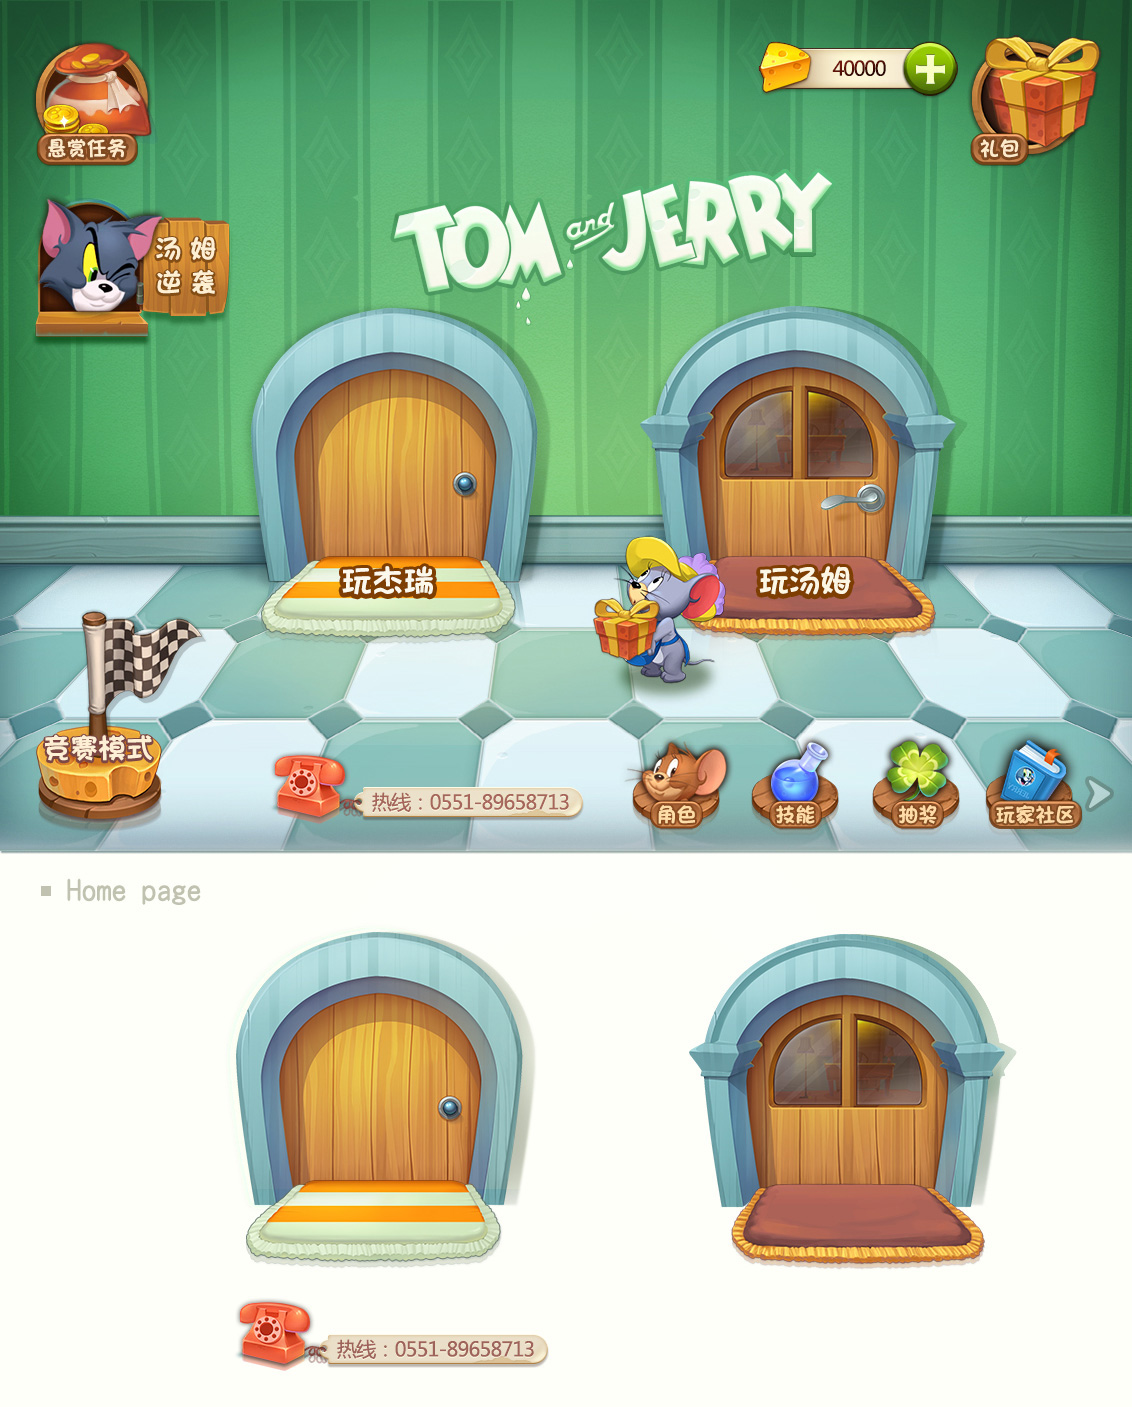 American cartoon Tom and jerry the official mobile game on Behance